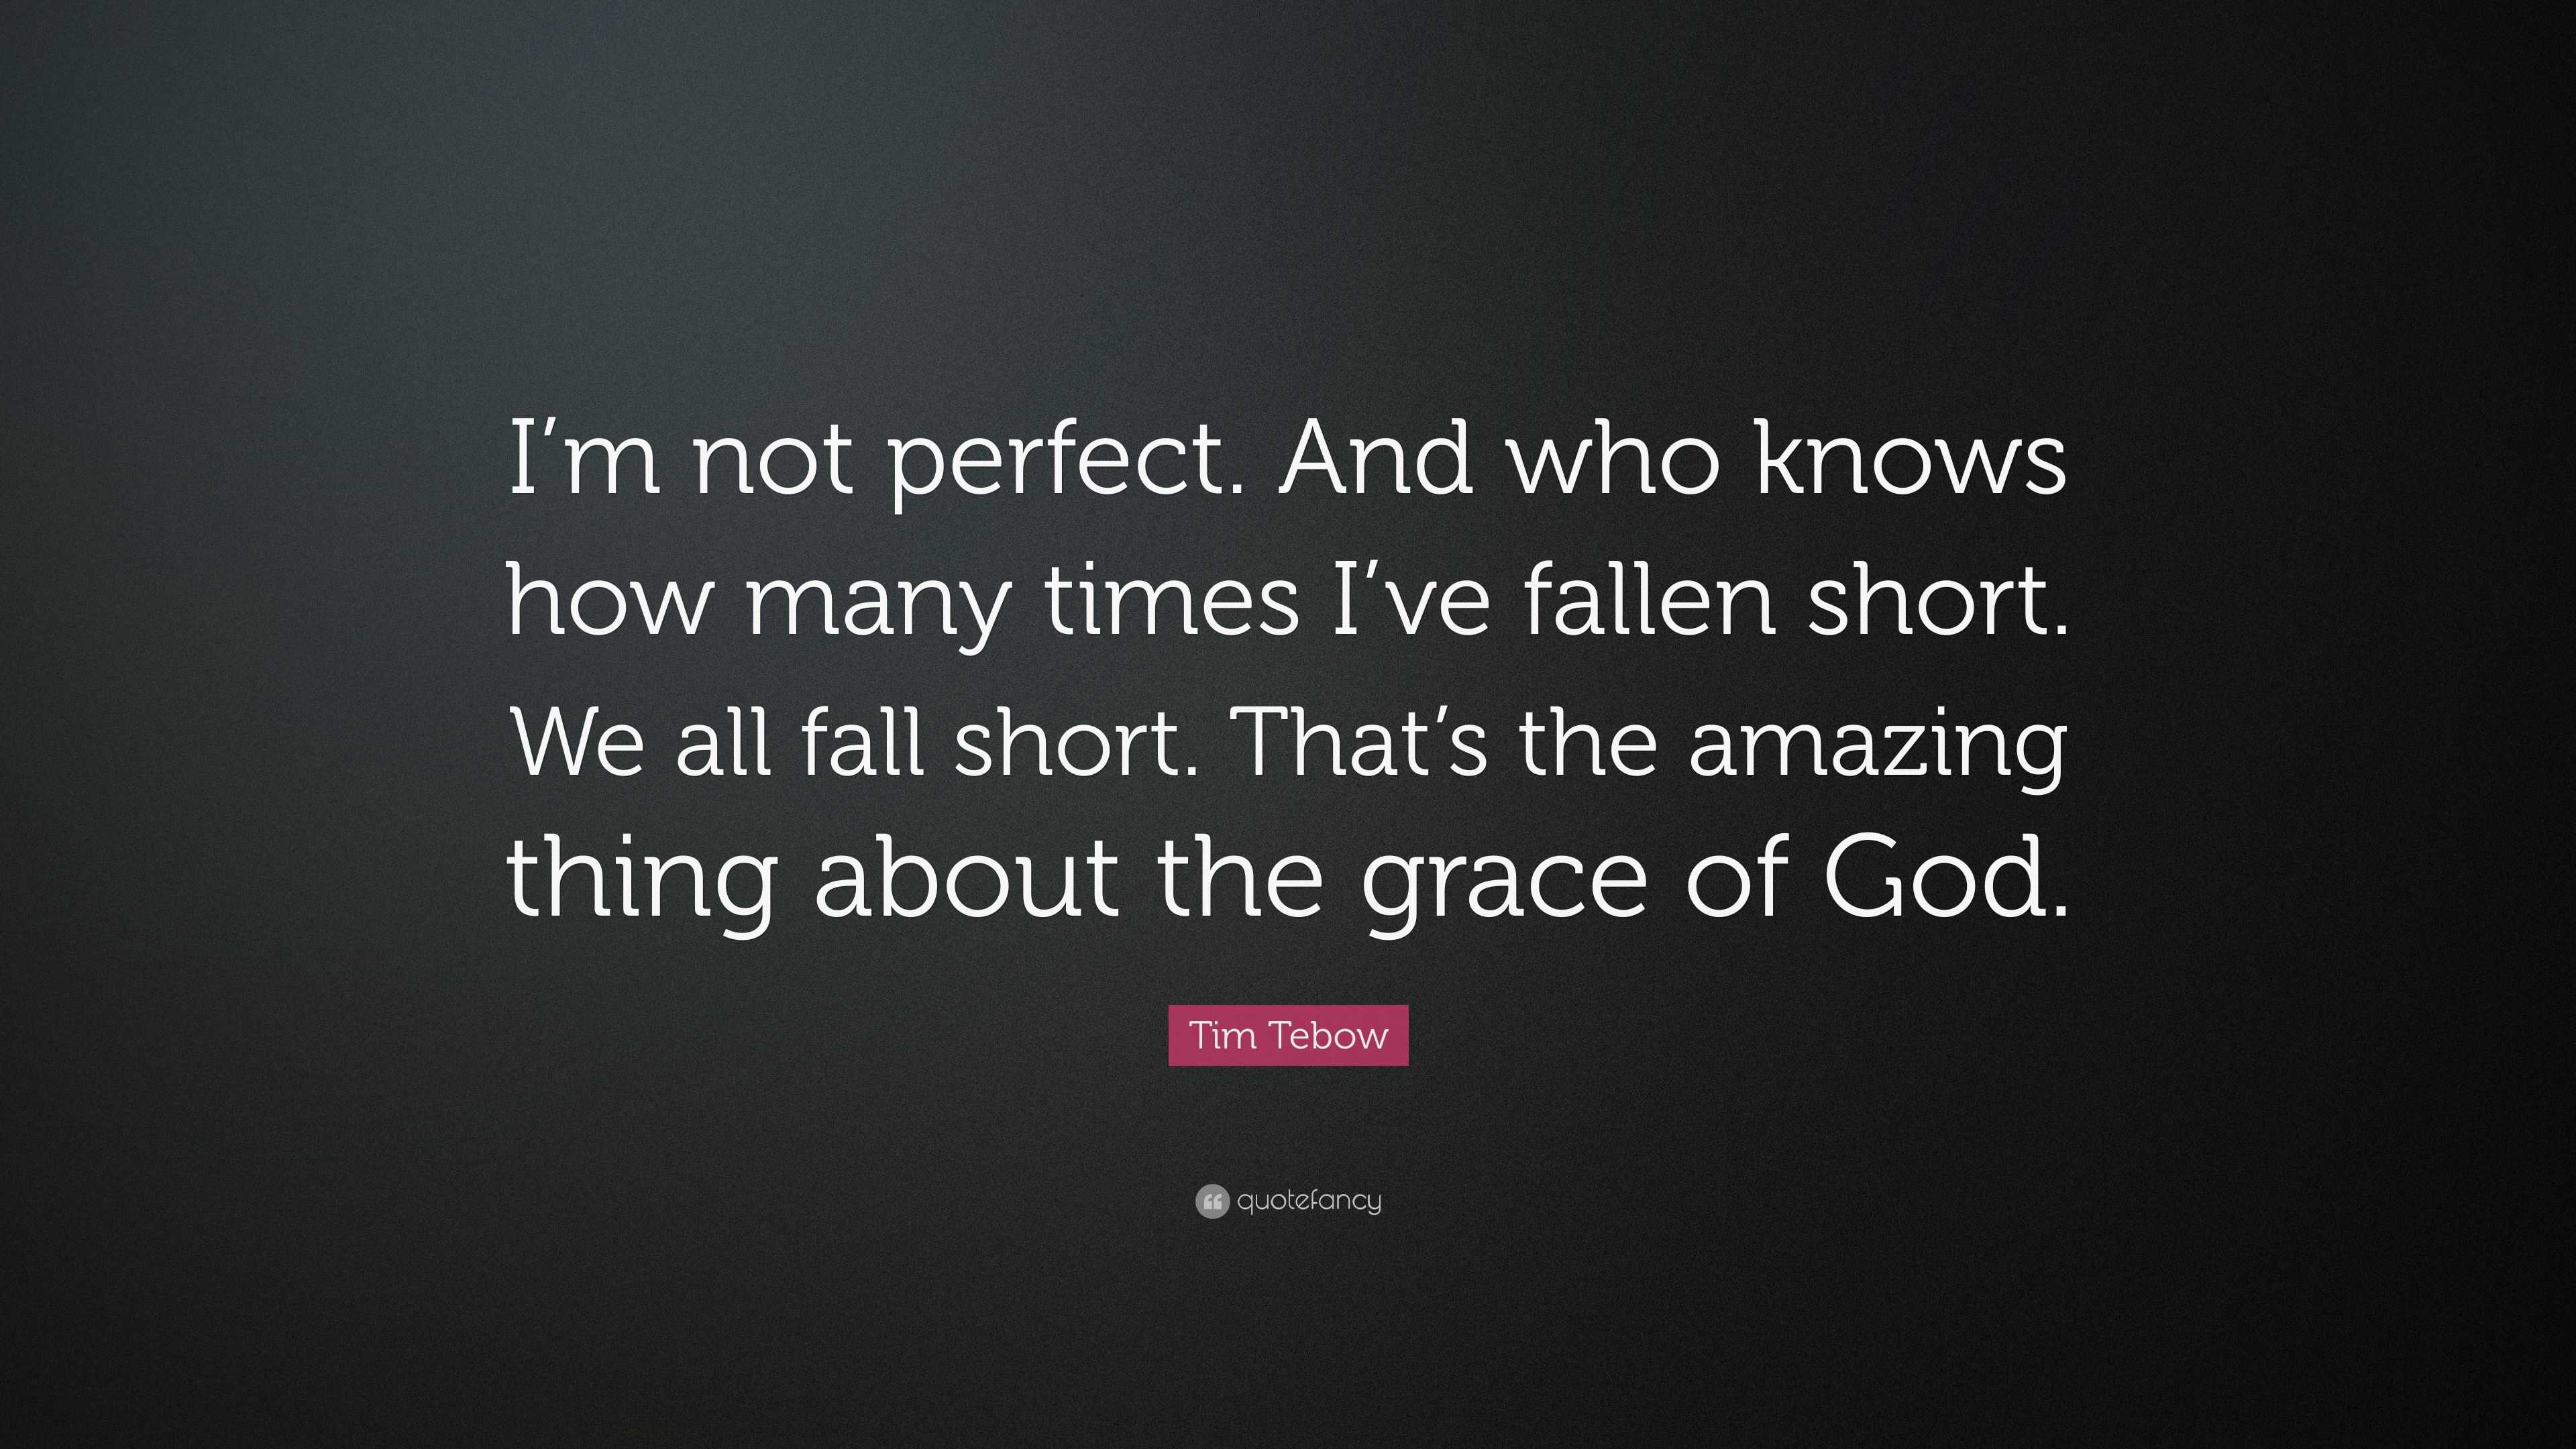 Tim Tebow Quote I M Not Perfect And Who Knows How Many Times I Ve Fallen Short We All Fall Short That S The Amazing Thing About The G